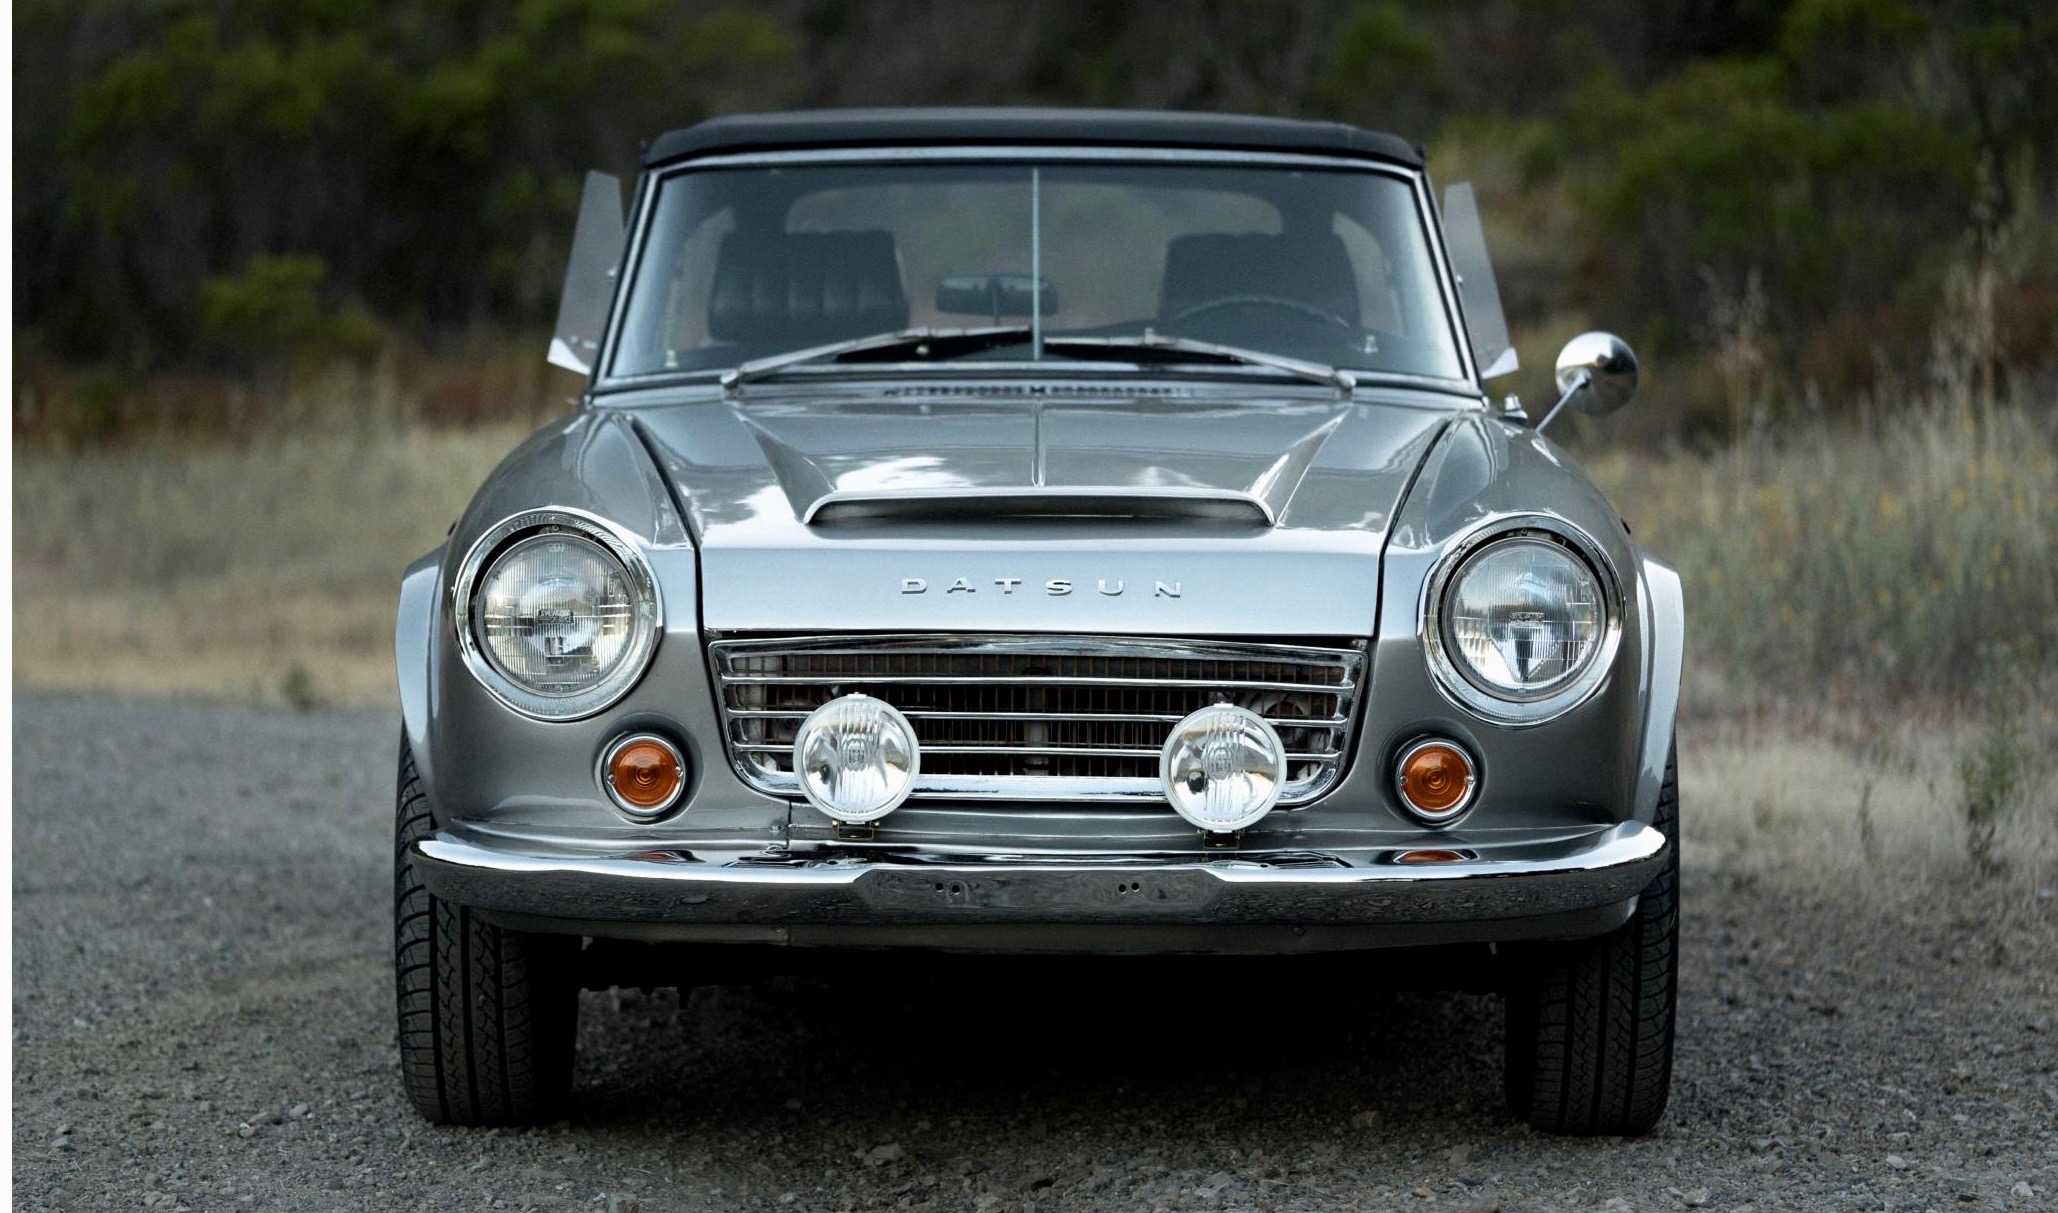 1967 Datsun 1600, Before the Z, Datsun made its name with roadsters, ClassicCars.com Journal